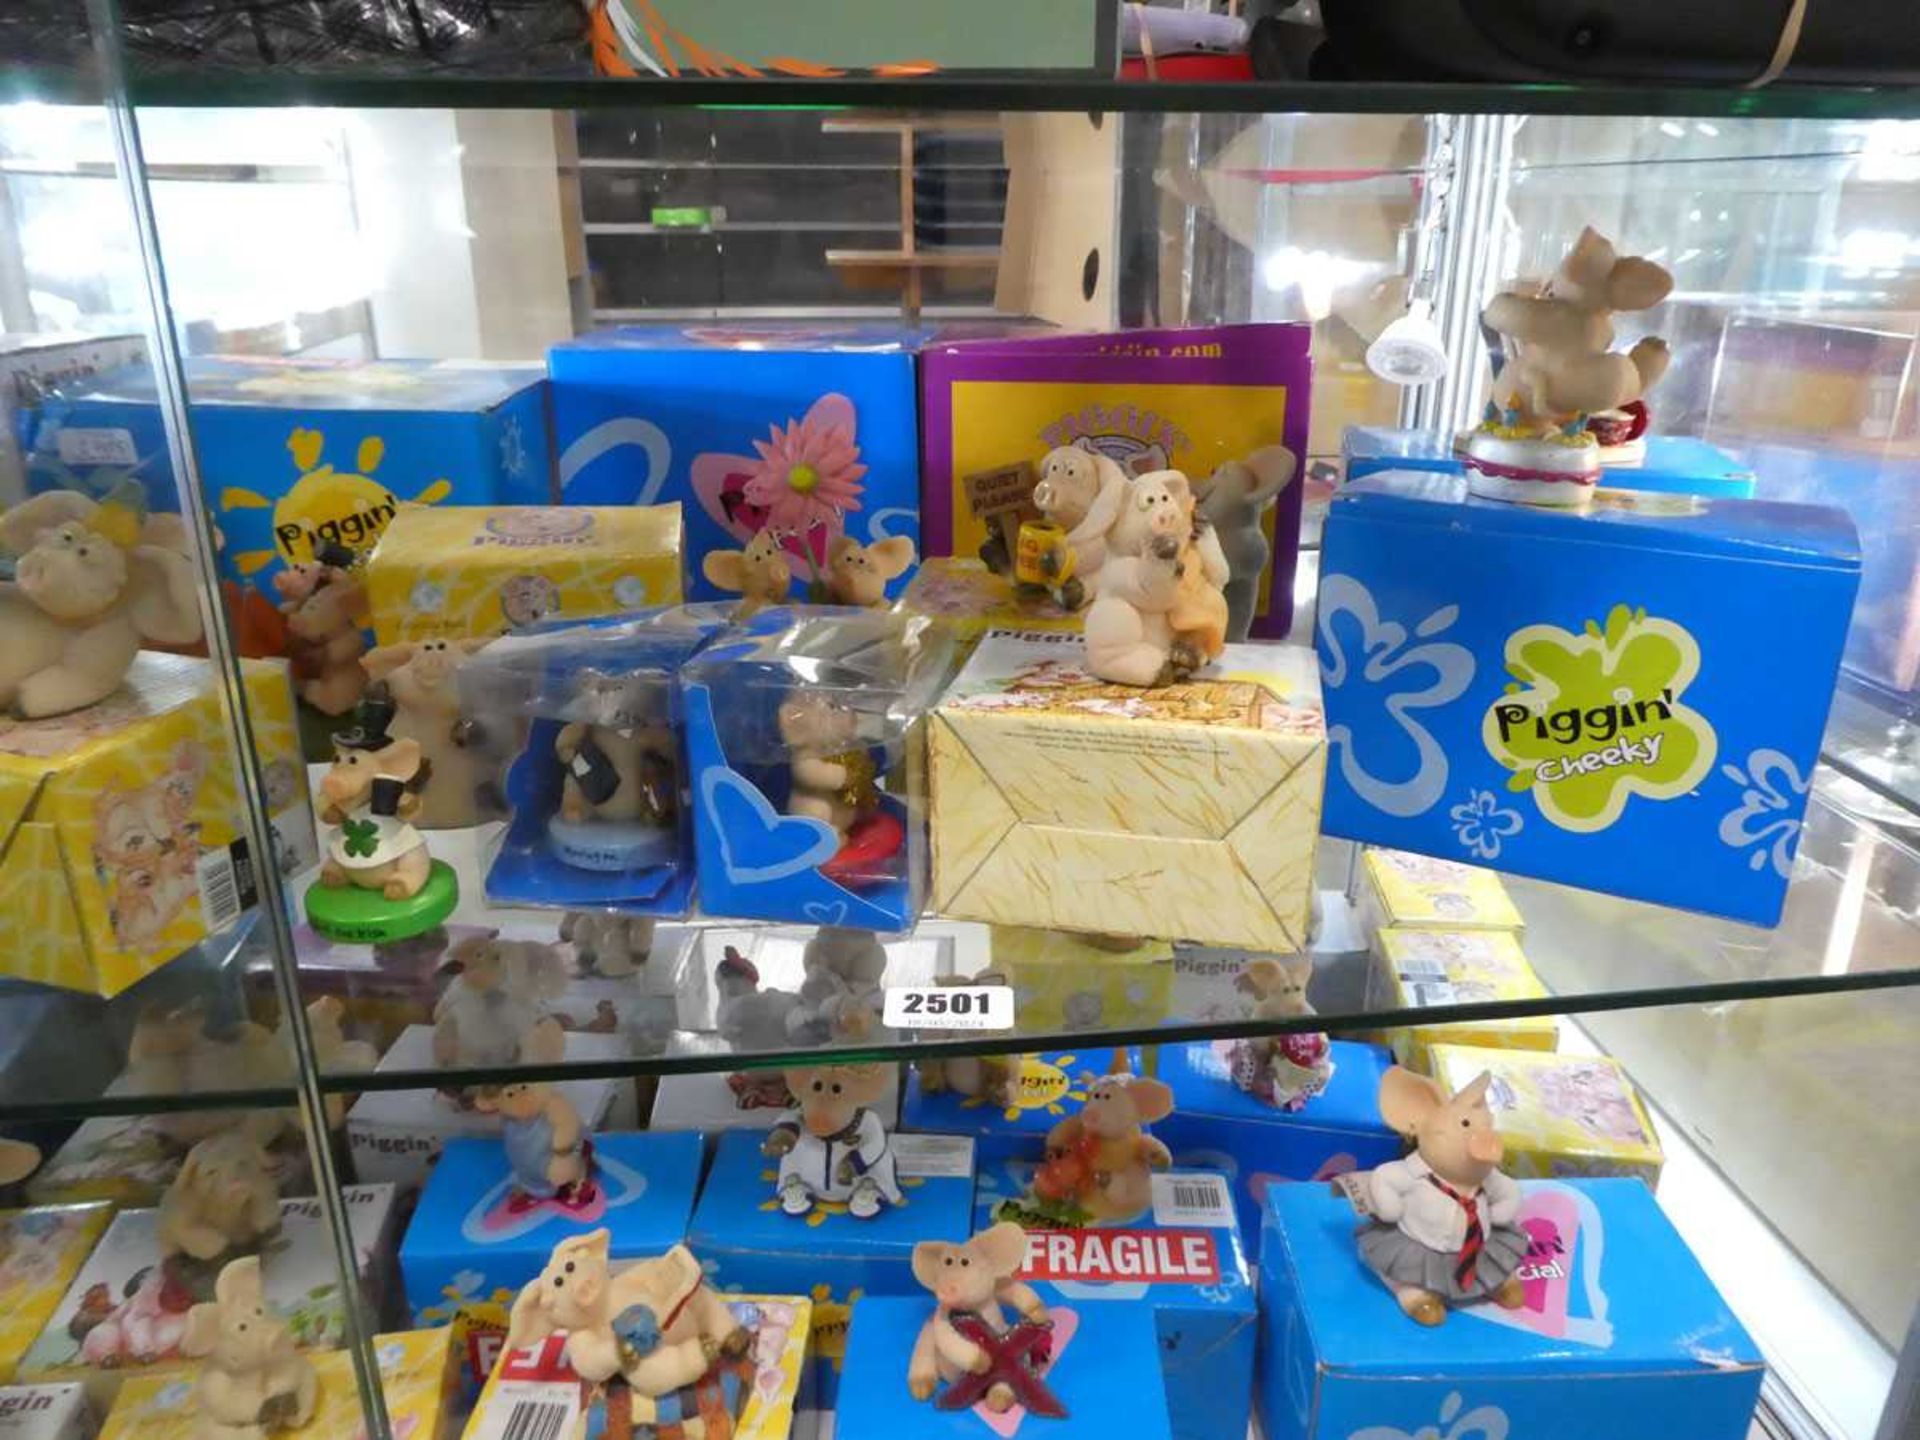 Large collection of Piggin collectible figures with original boxes and packaging - Image 4 of 5